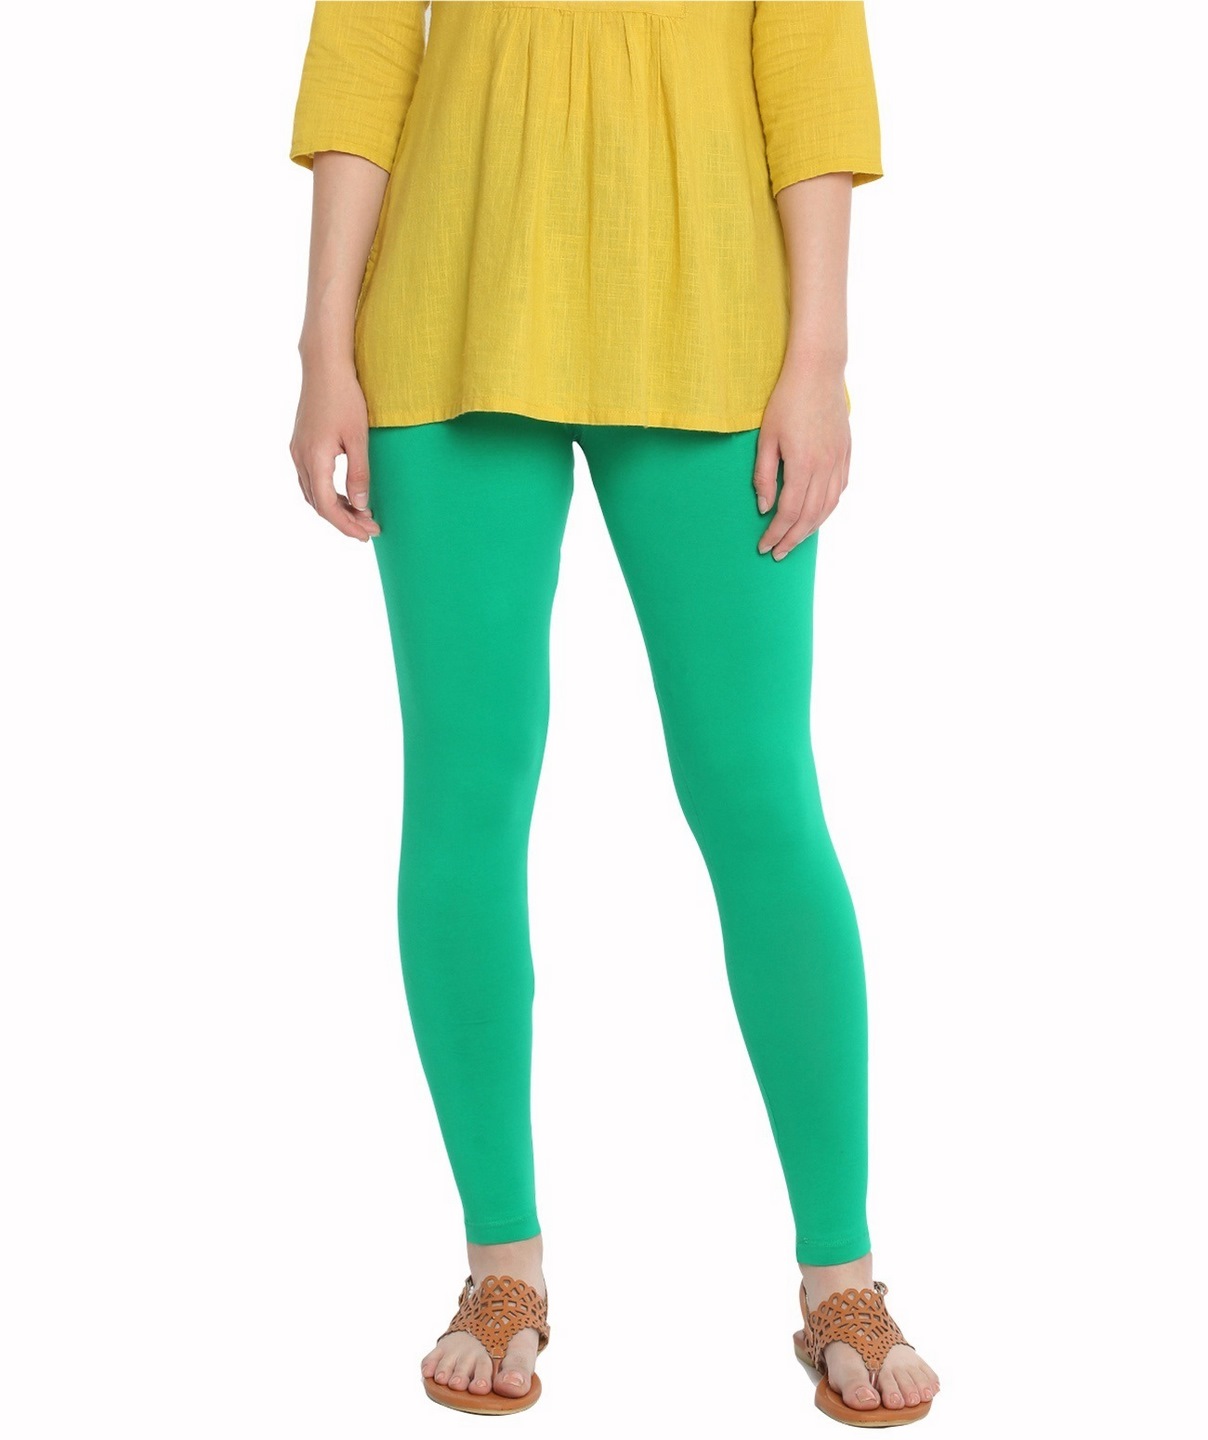 GO COLORS Cotton Solid, Elastane Ankle Length Legging (S, Light Mustard) in  Bangalore at best price by Color Hop - Justdial